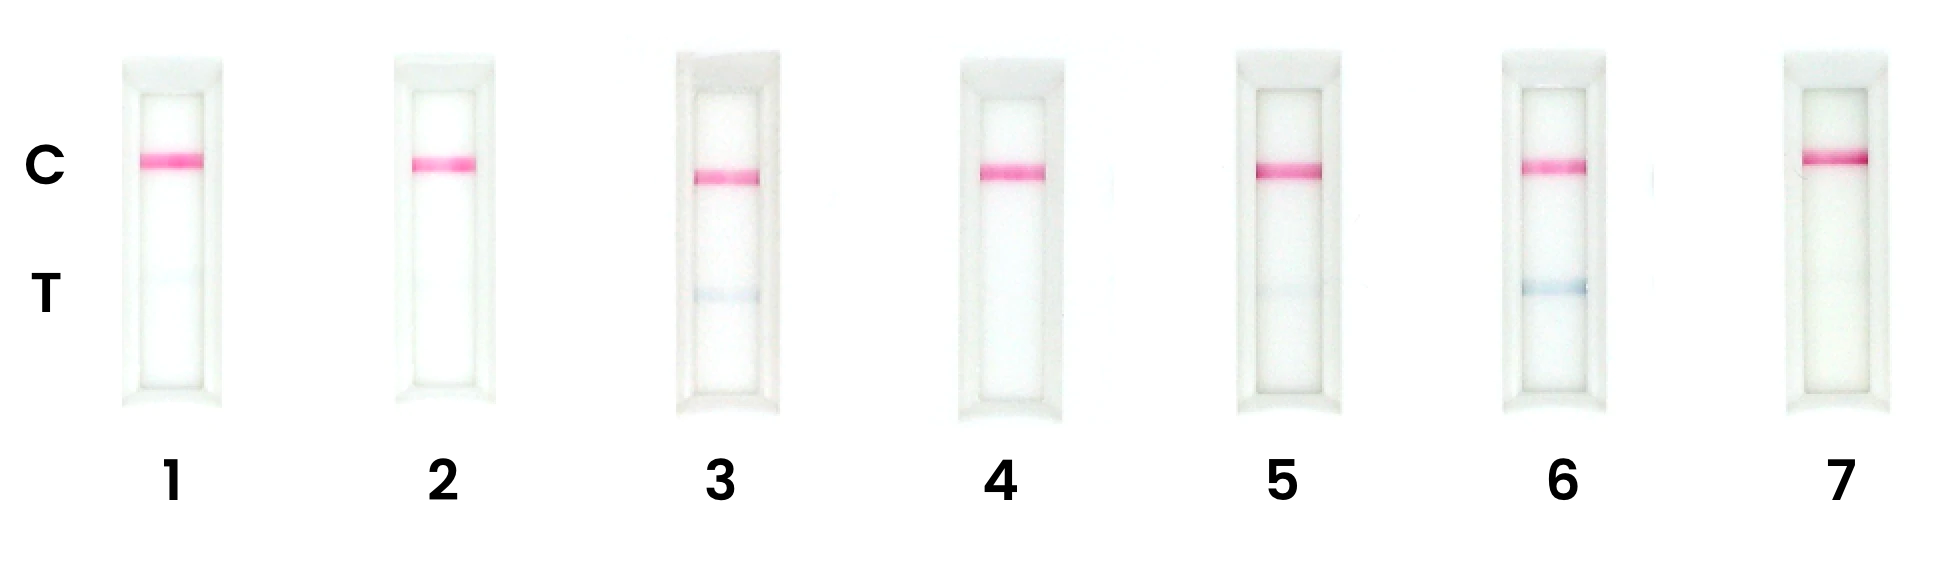 lateral flow test results from commercially available COVID antigen test
